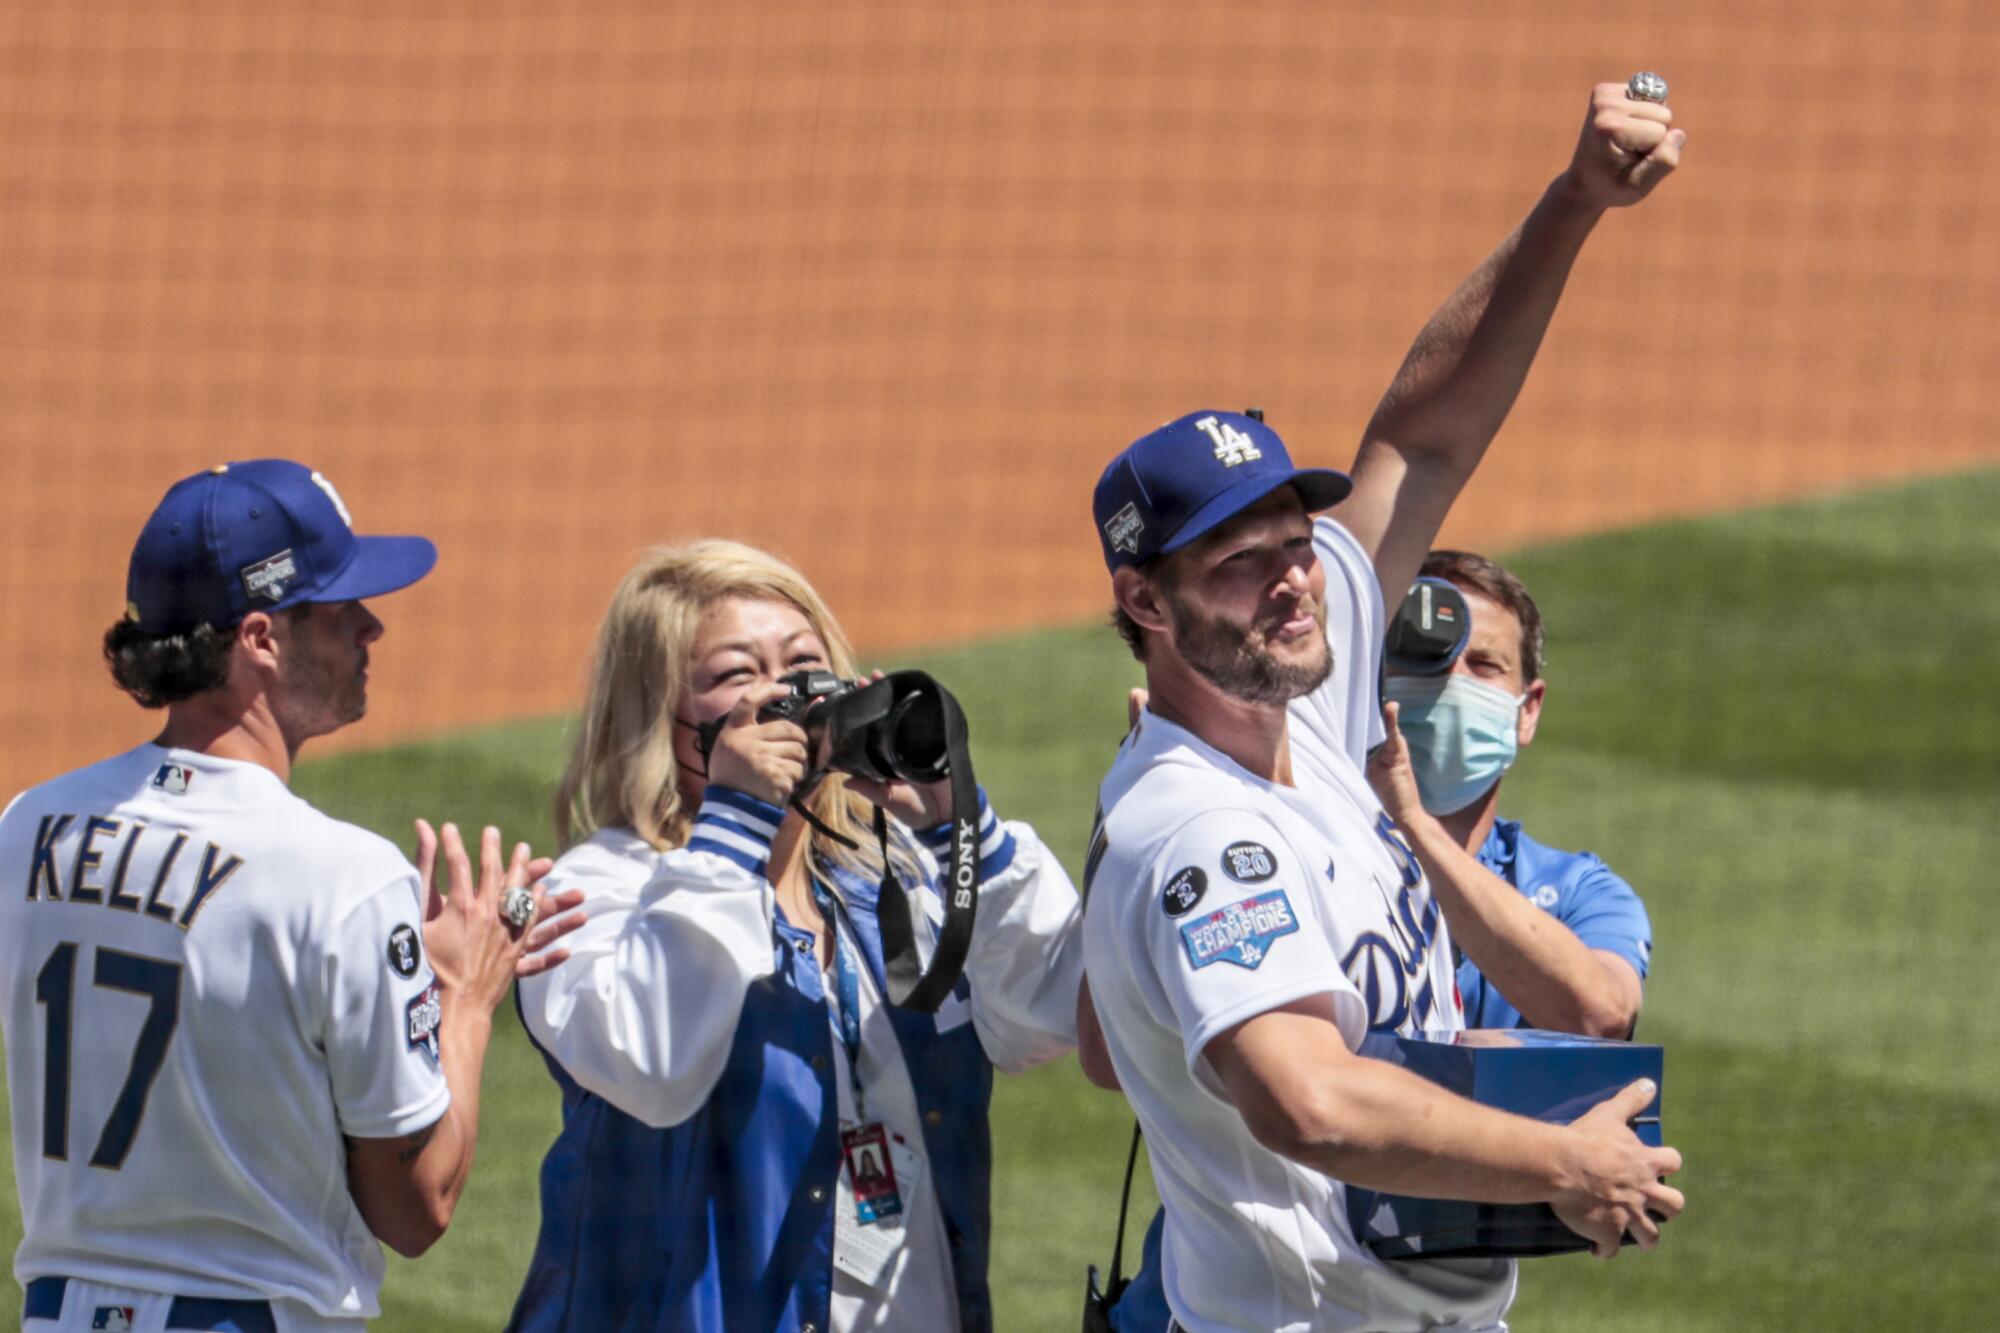 Clayton Kershaw shows off his World Series ring Friday during an on-field ceremony before the home opener at Dodger Stadium.